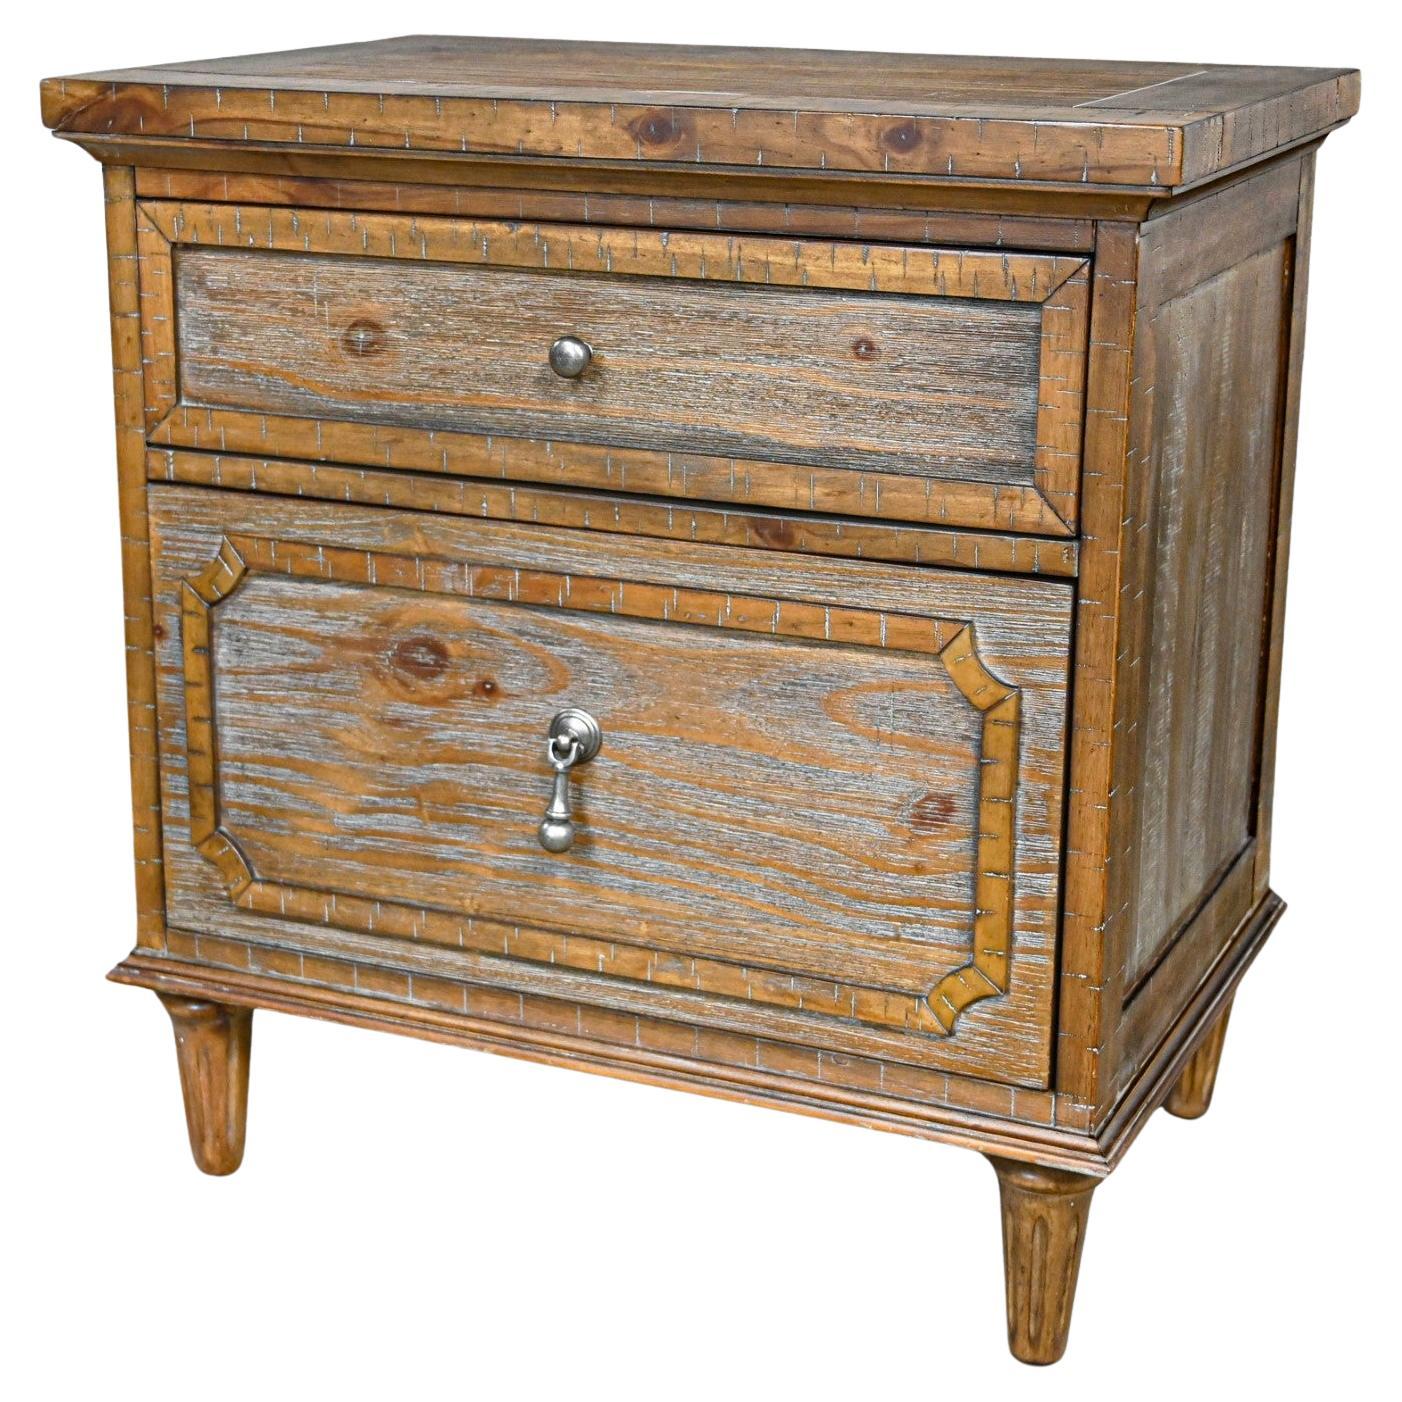 Early 21st Century French Country Rustic Mahogany Nightstand End Table Cabinet For Sale